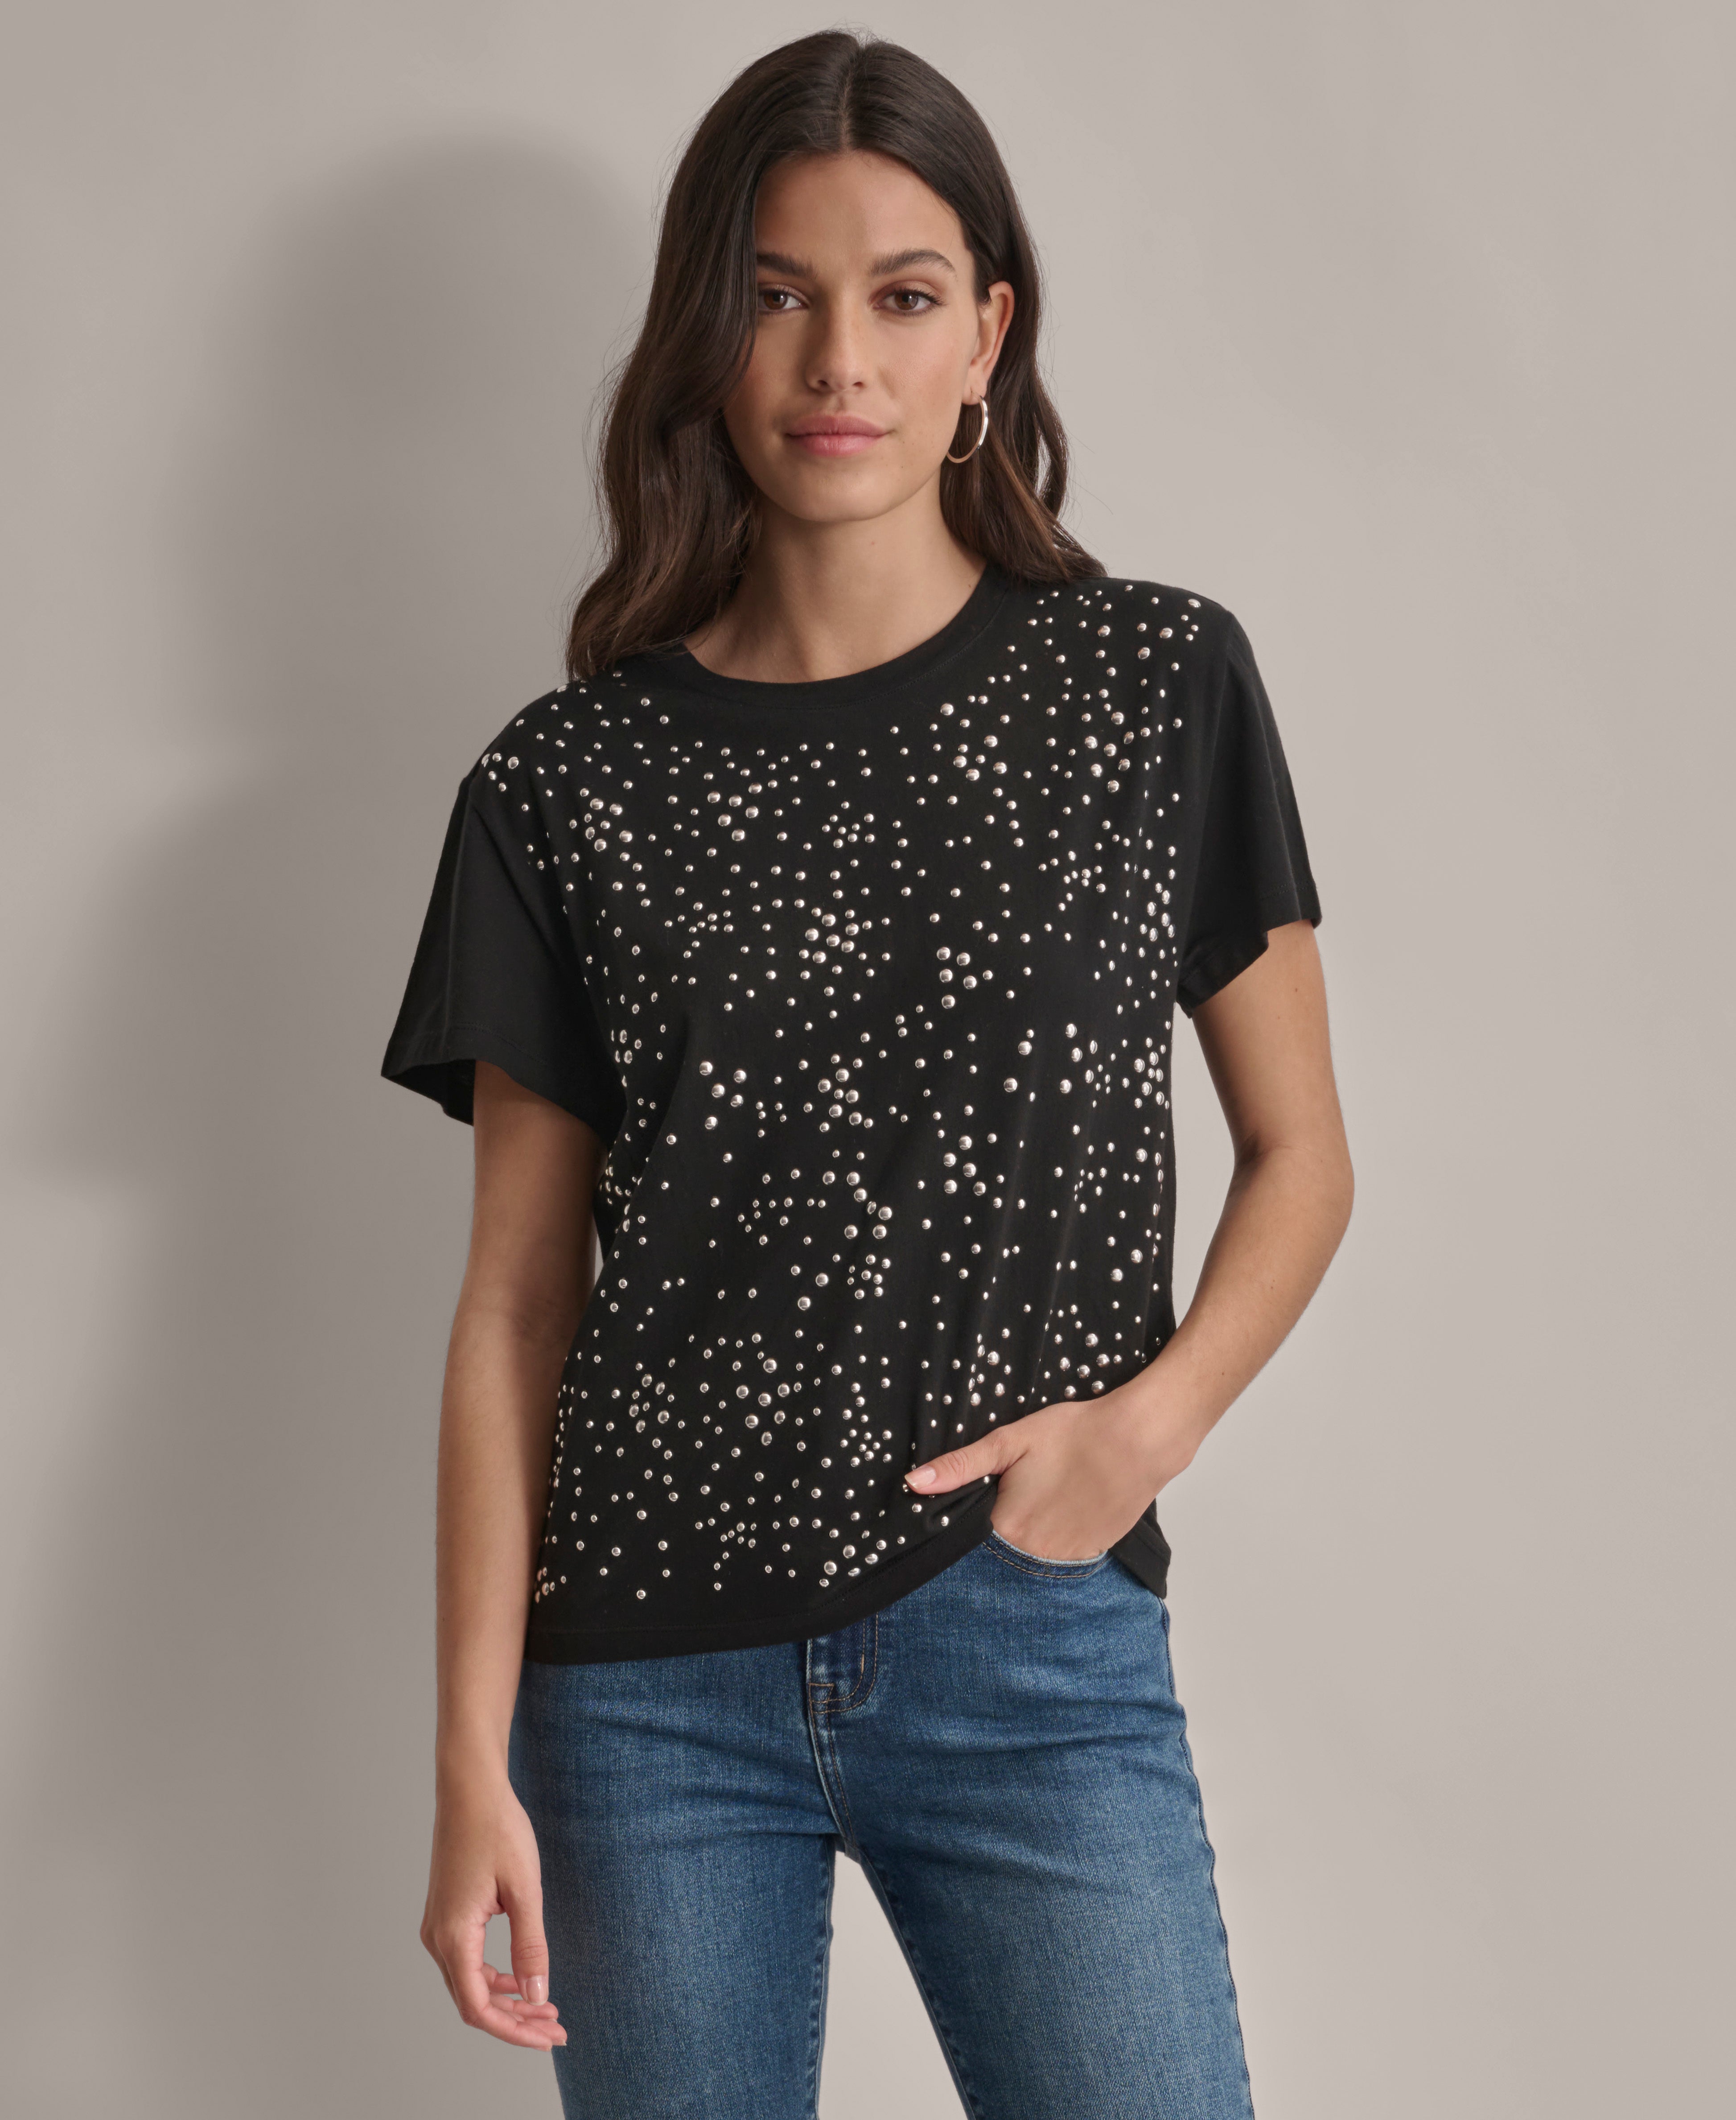 DKNY SCATTERED DOME STUDS BOXY TEE,Black